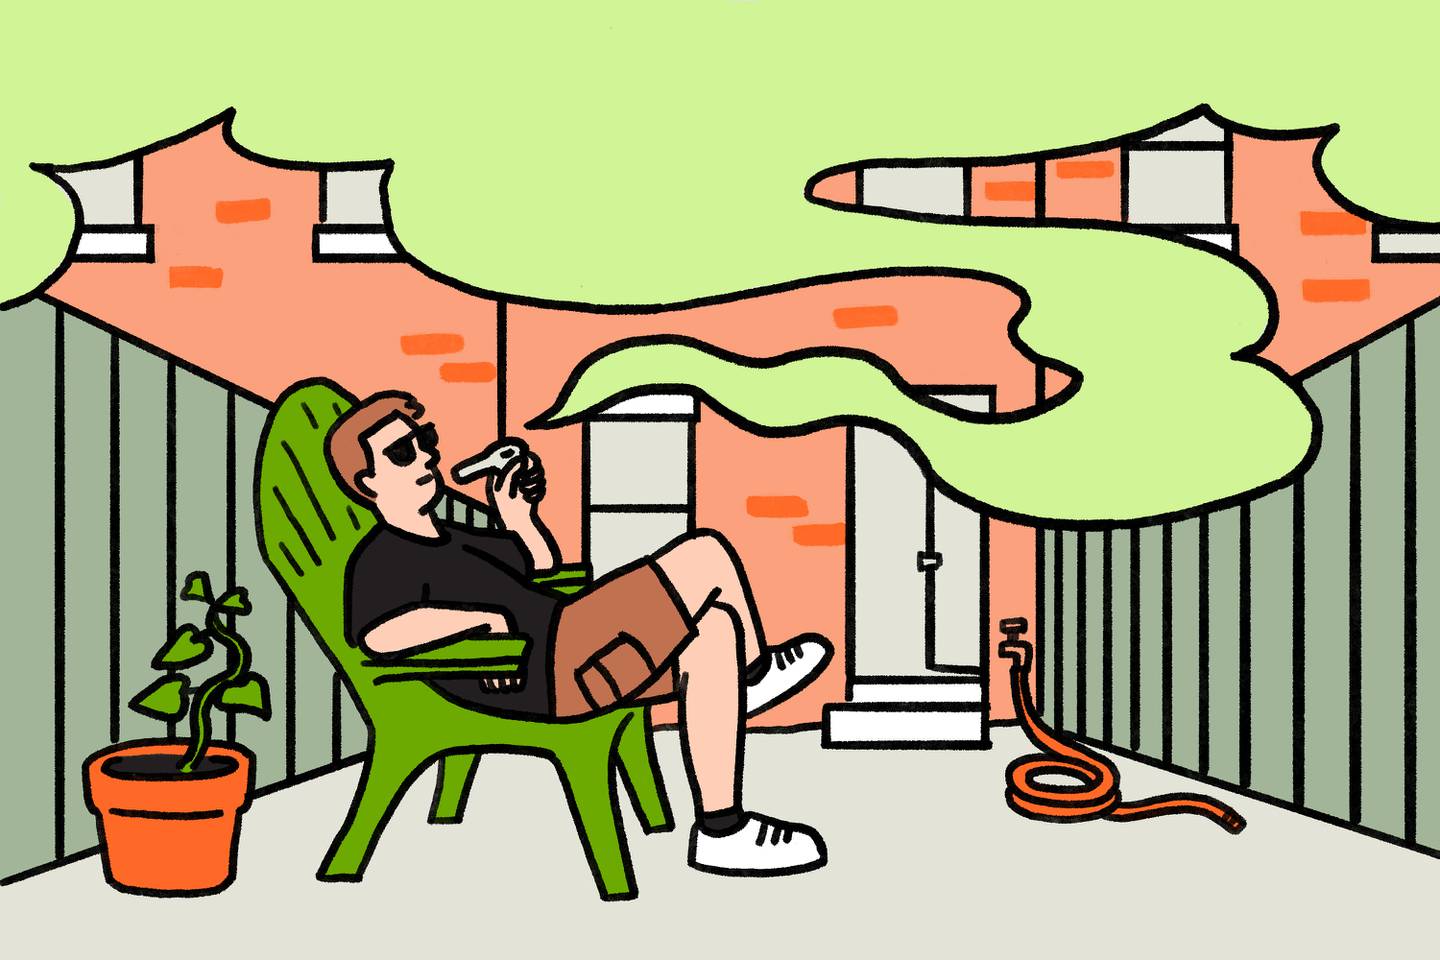 Illustration of man lounging in a green chair in his fenced-off backyard, smoking cannabis from a glass pipe, with a large green cloud of smoke curling around him.